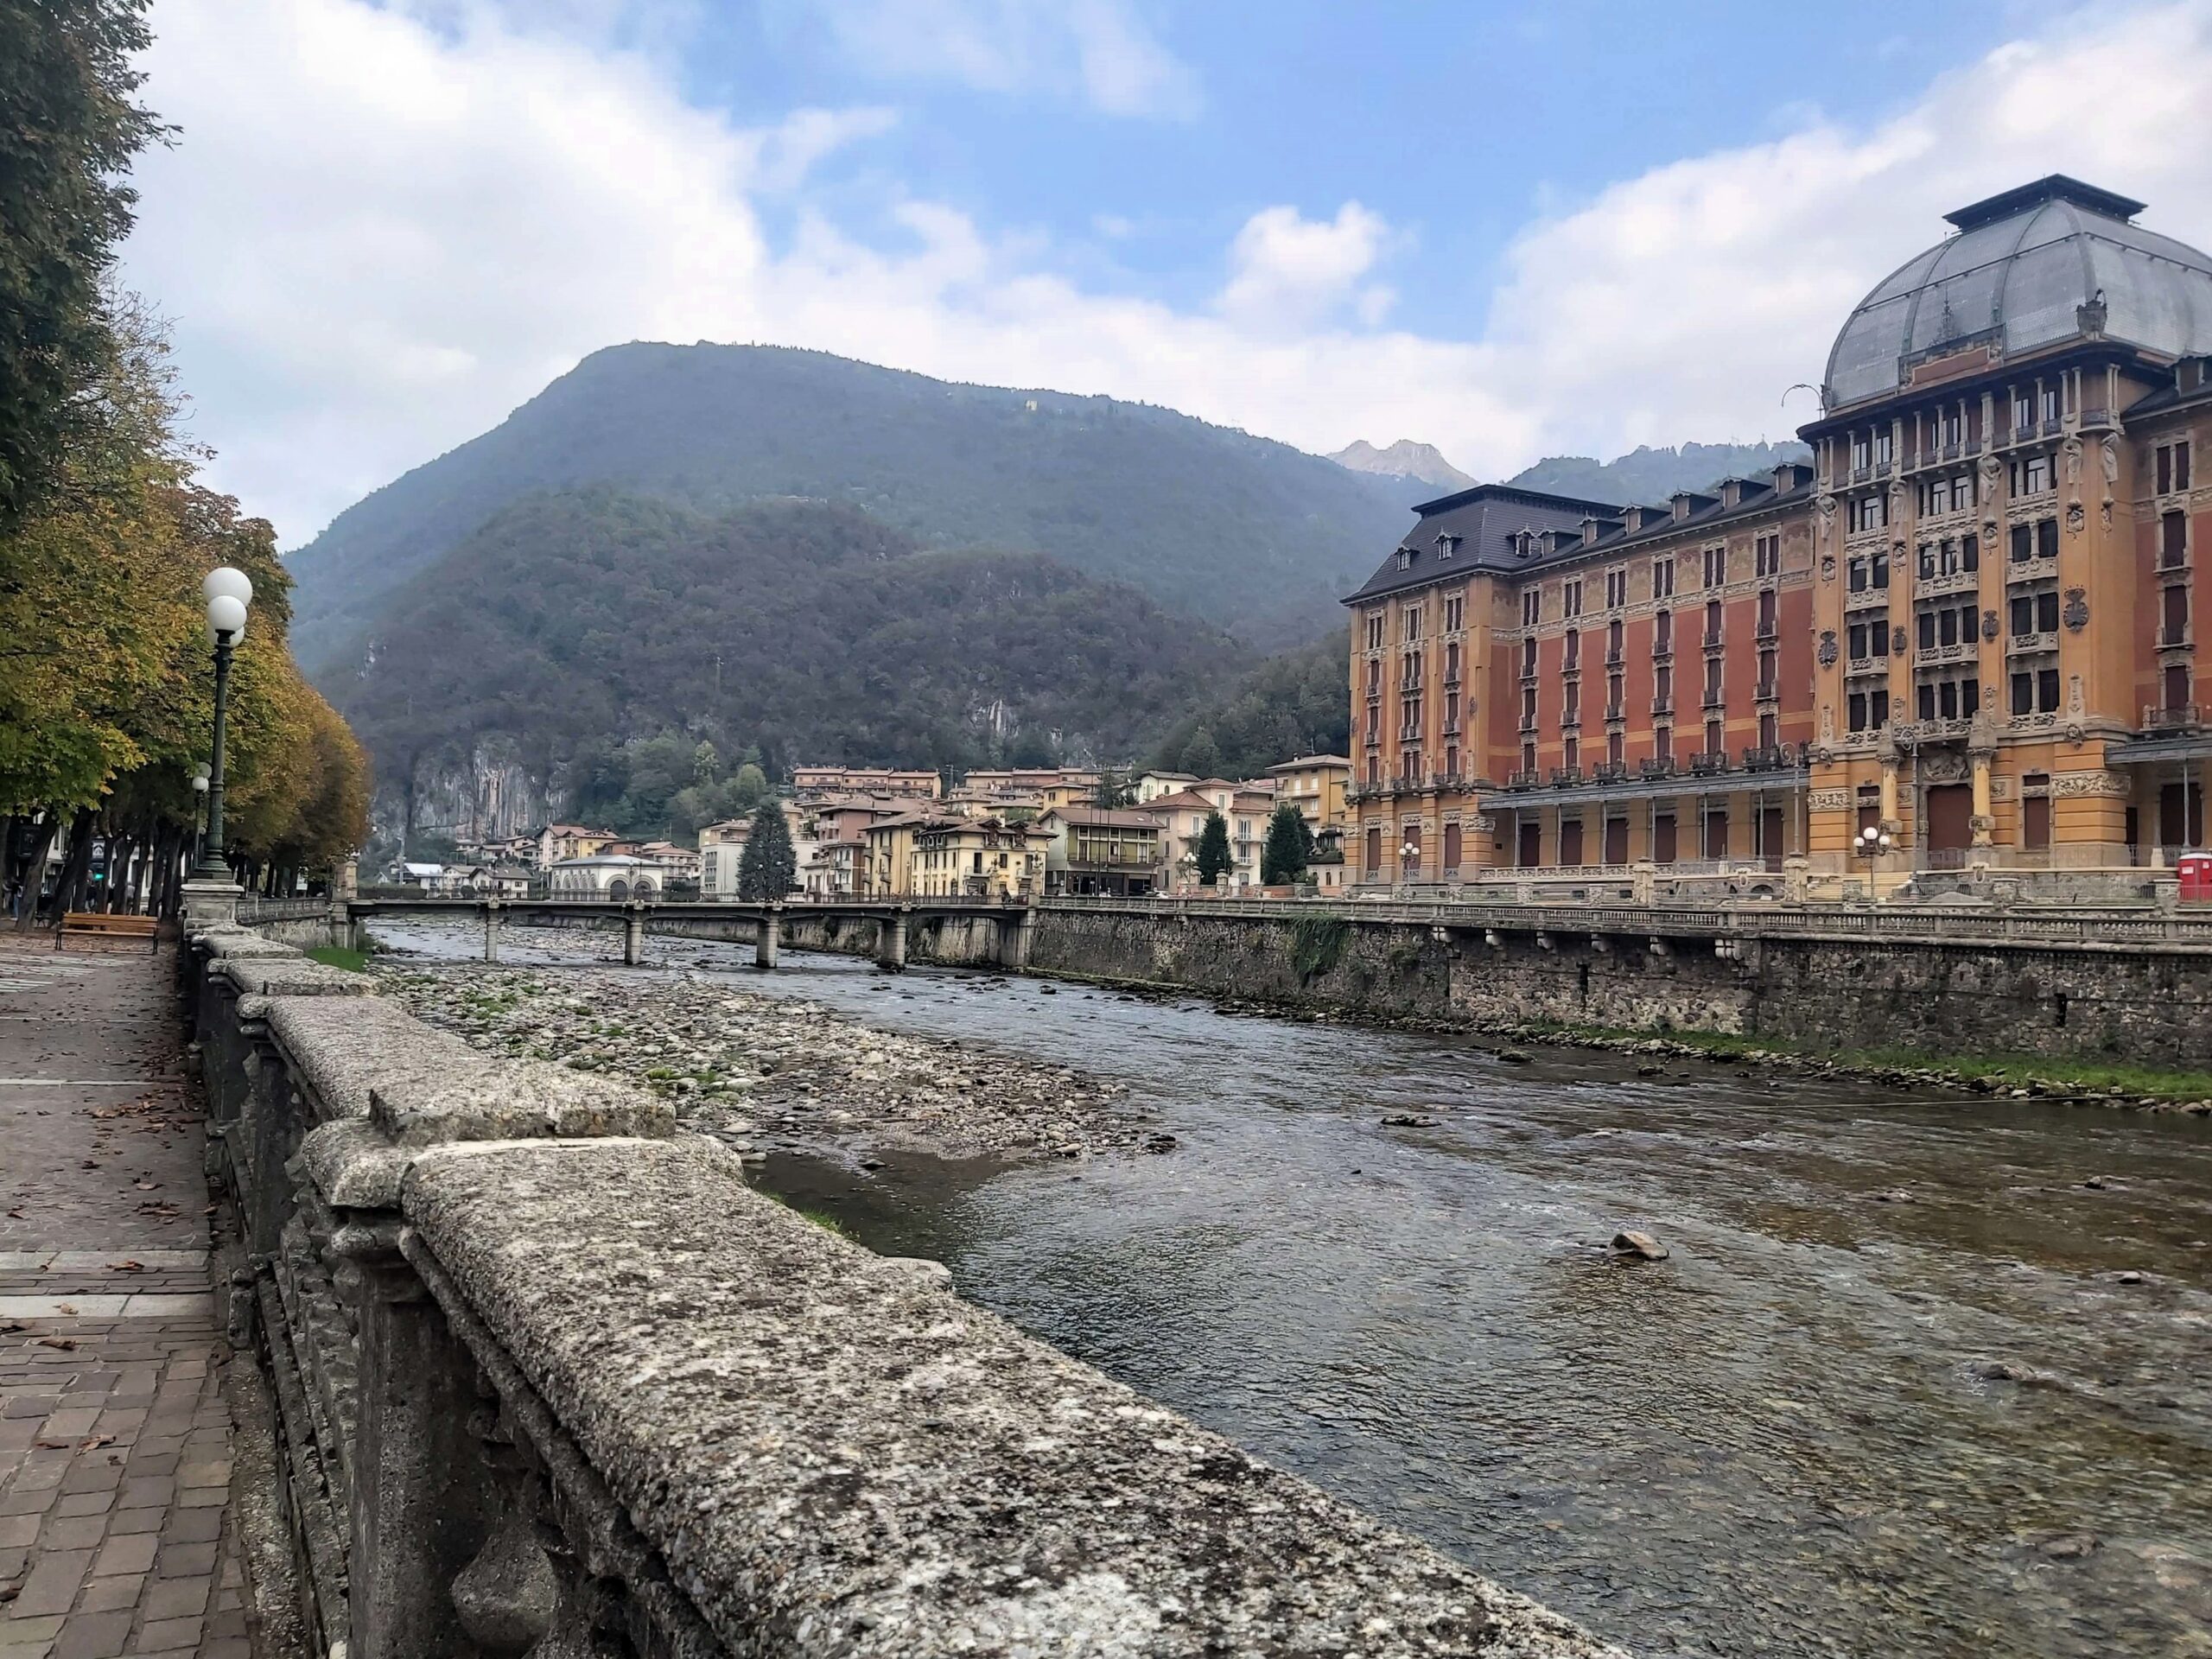 View of the River Brembo, buildings and mountains, San Pellegrino Terme, Italia